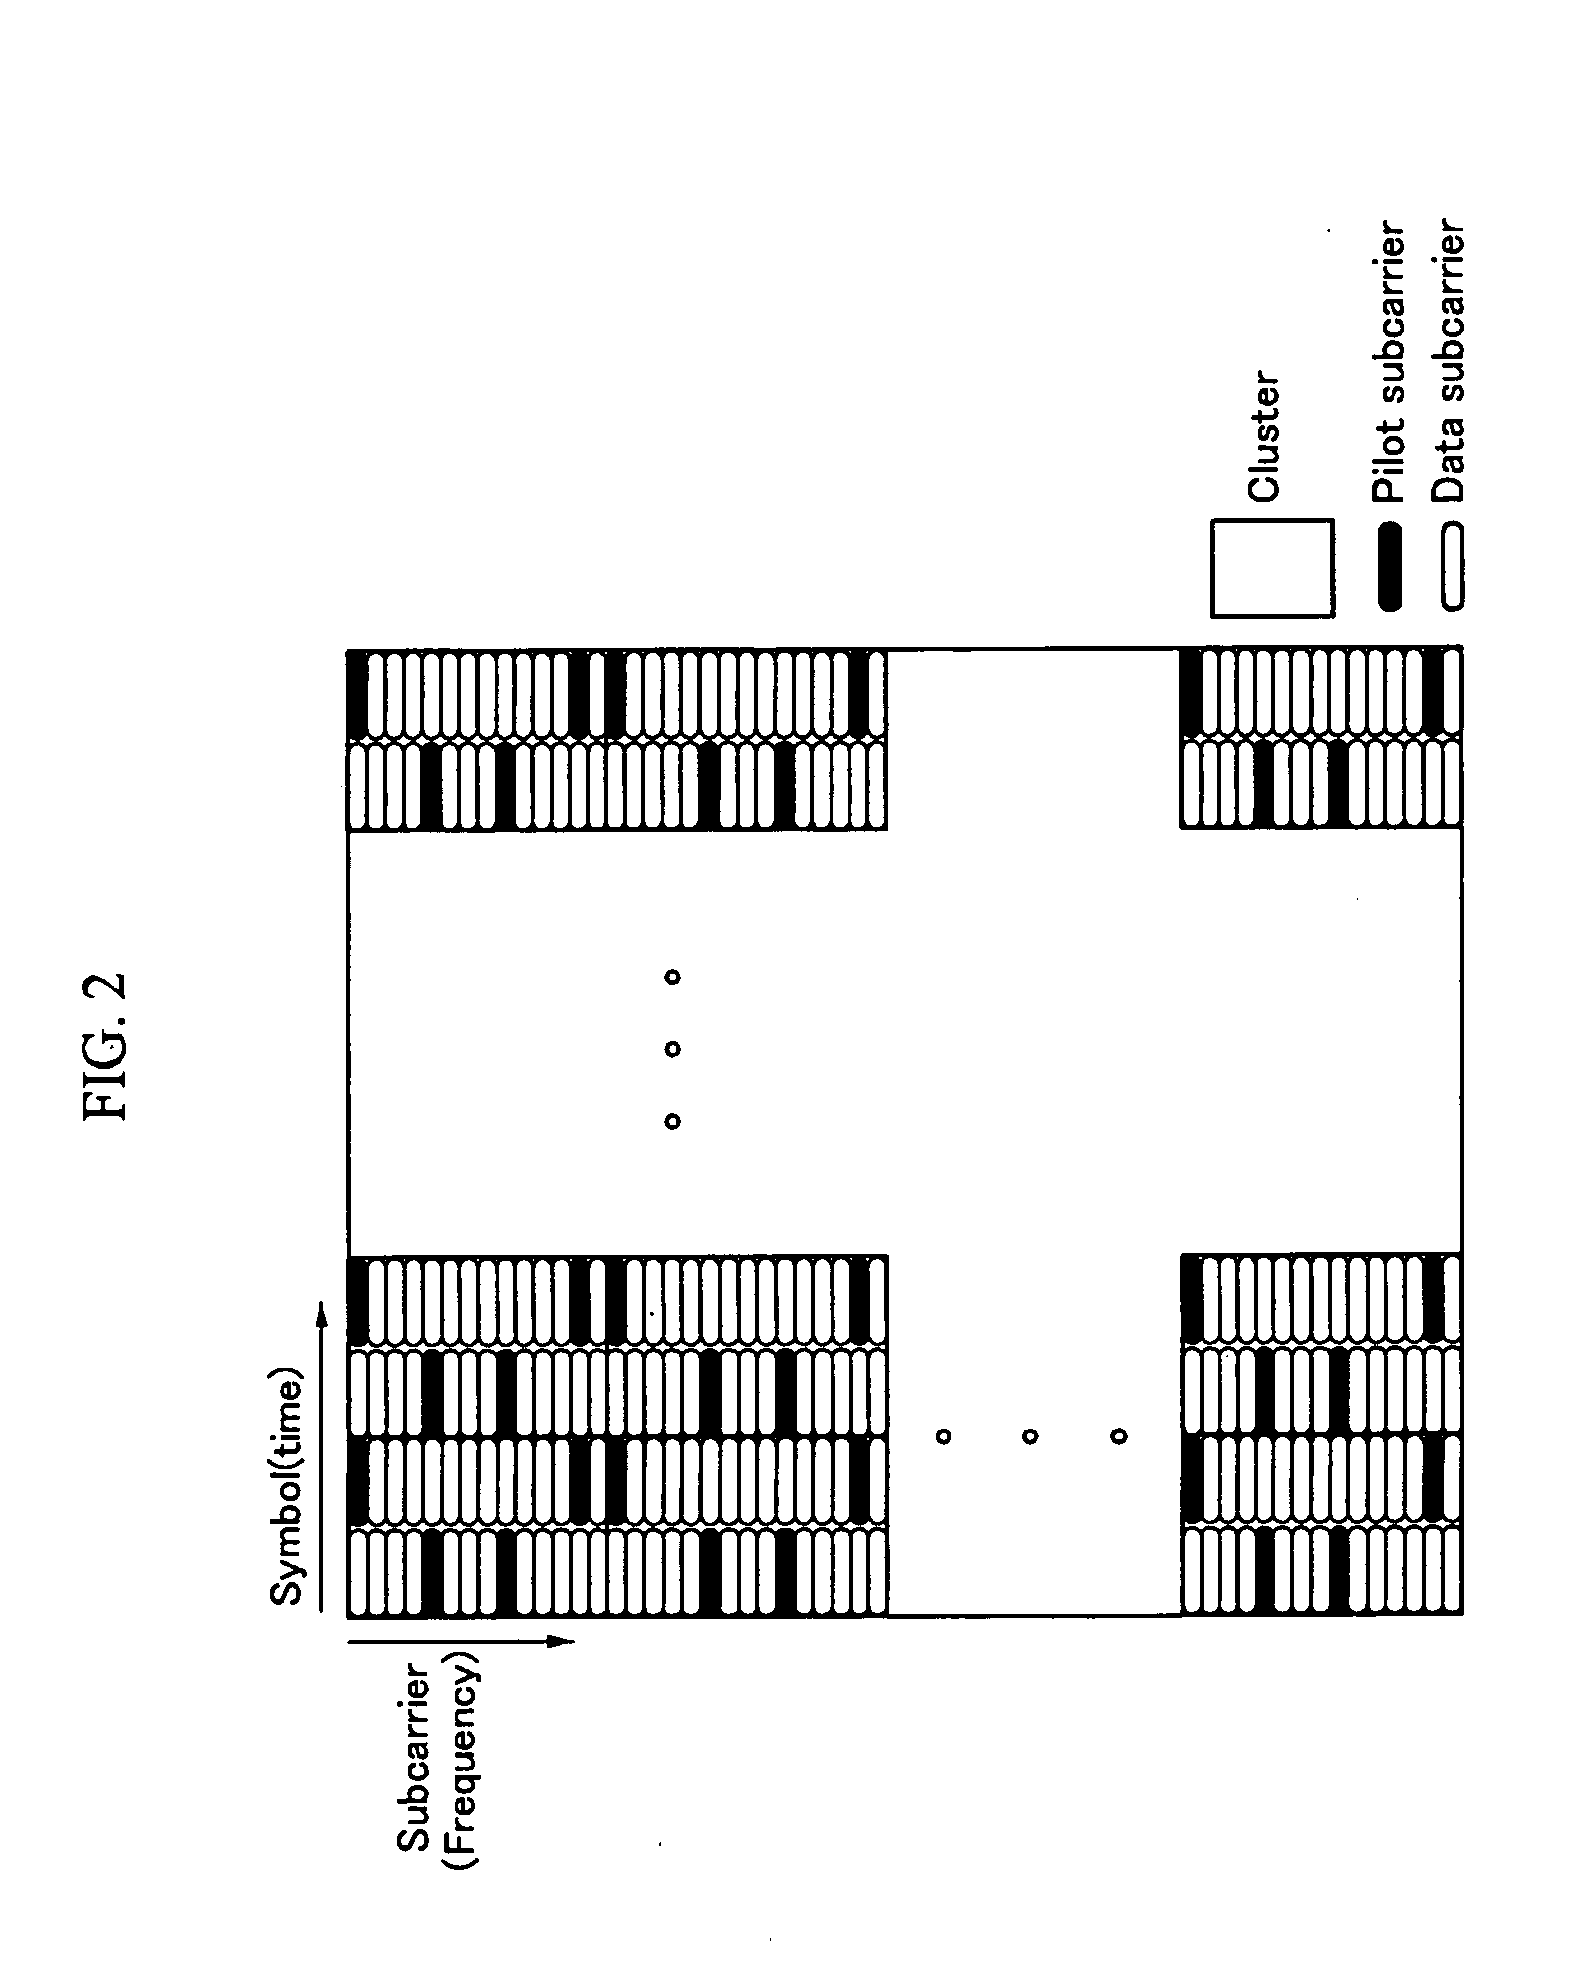 Interference cancellation method and module for OFDMA mobile communication system